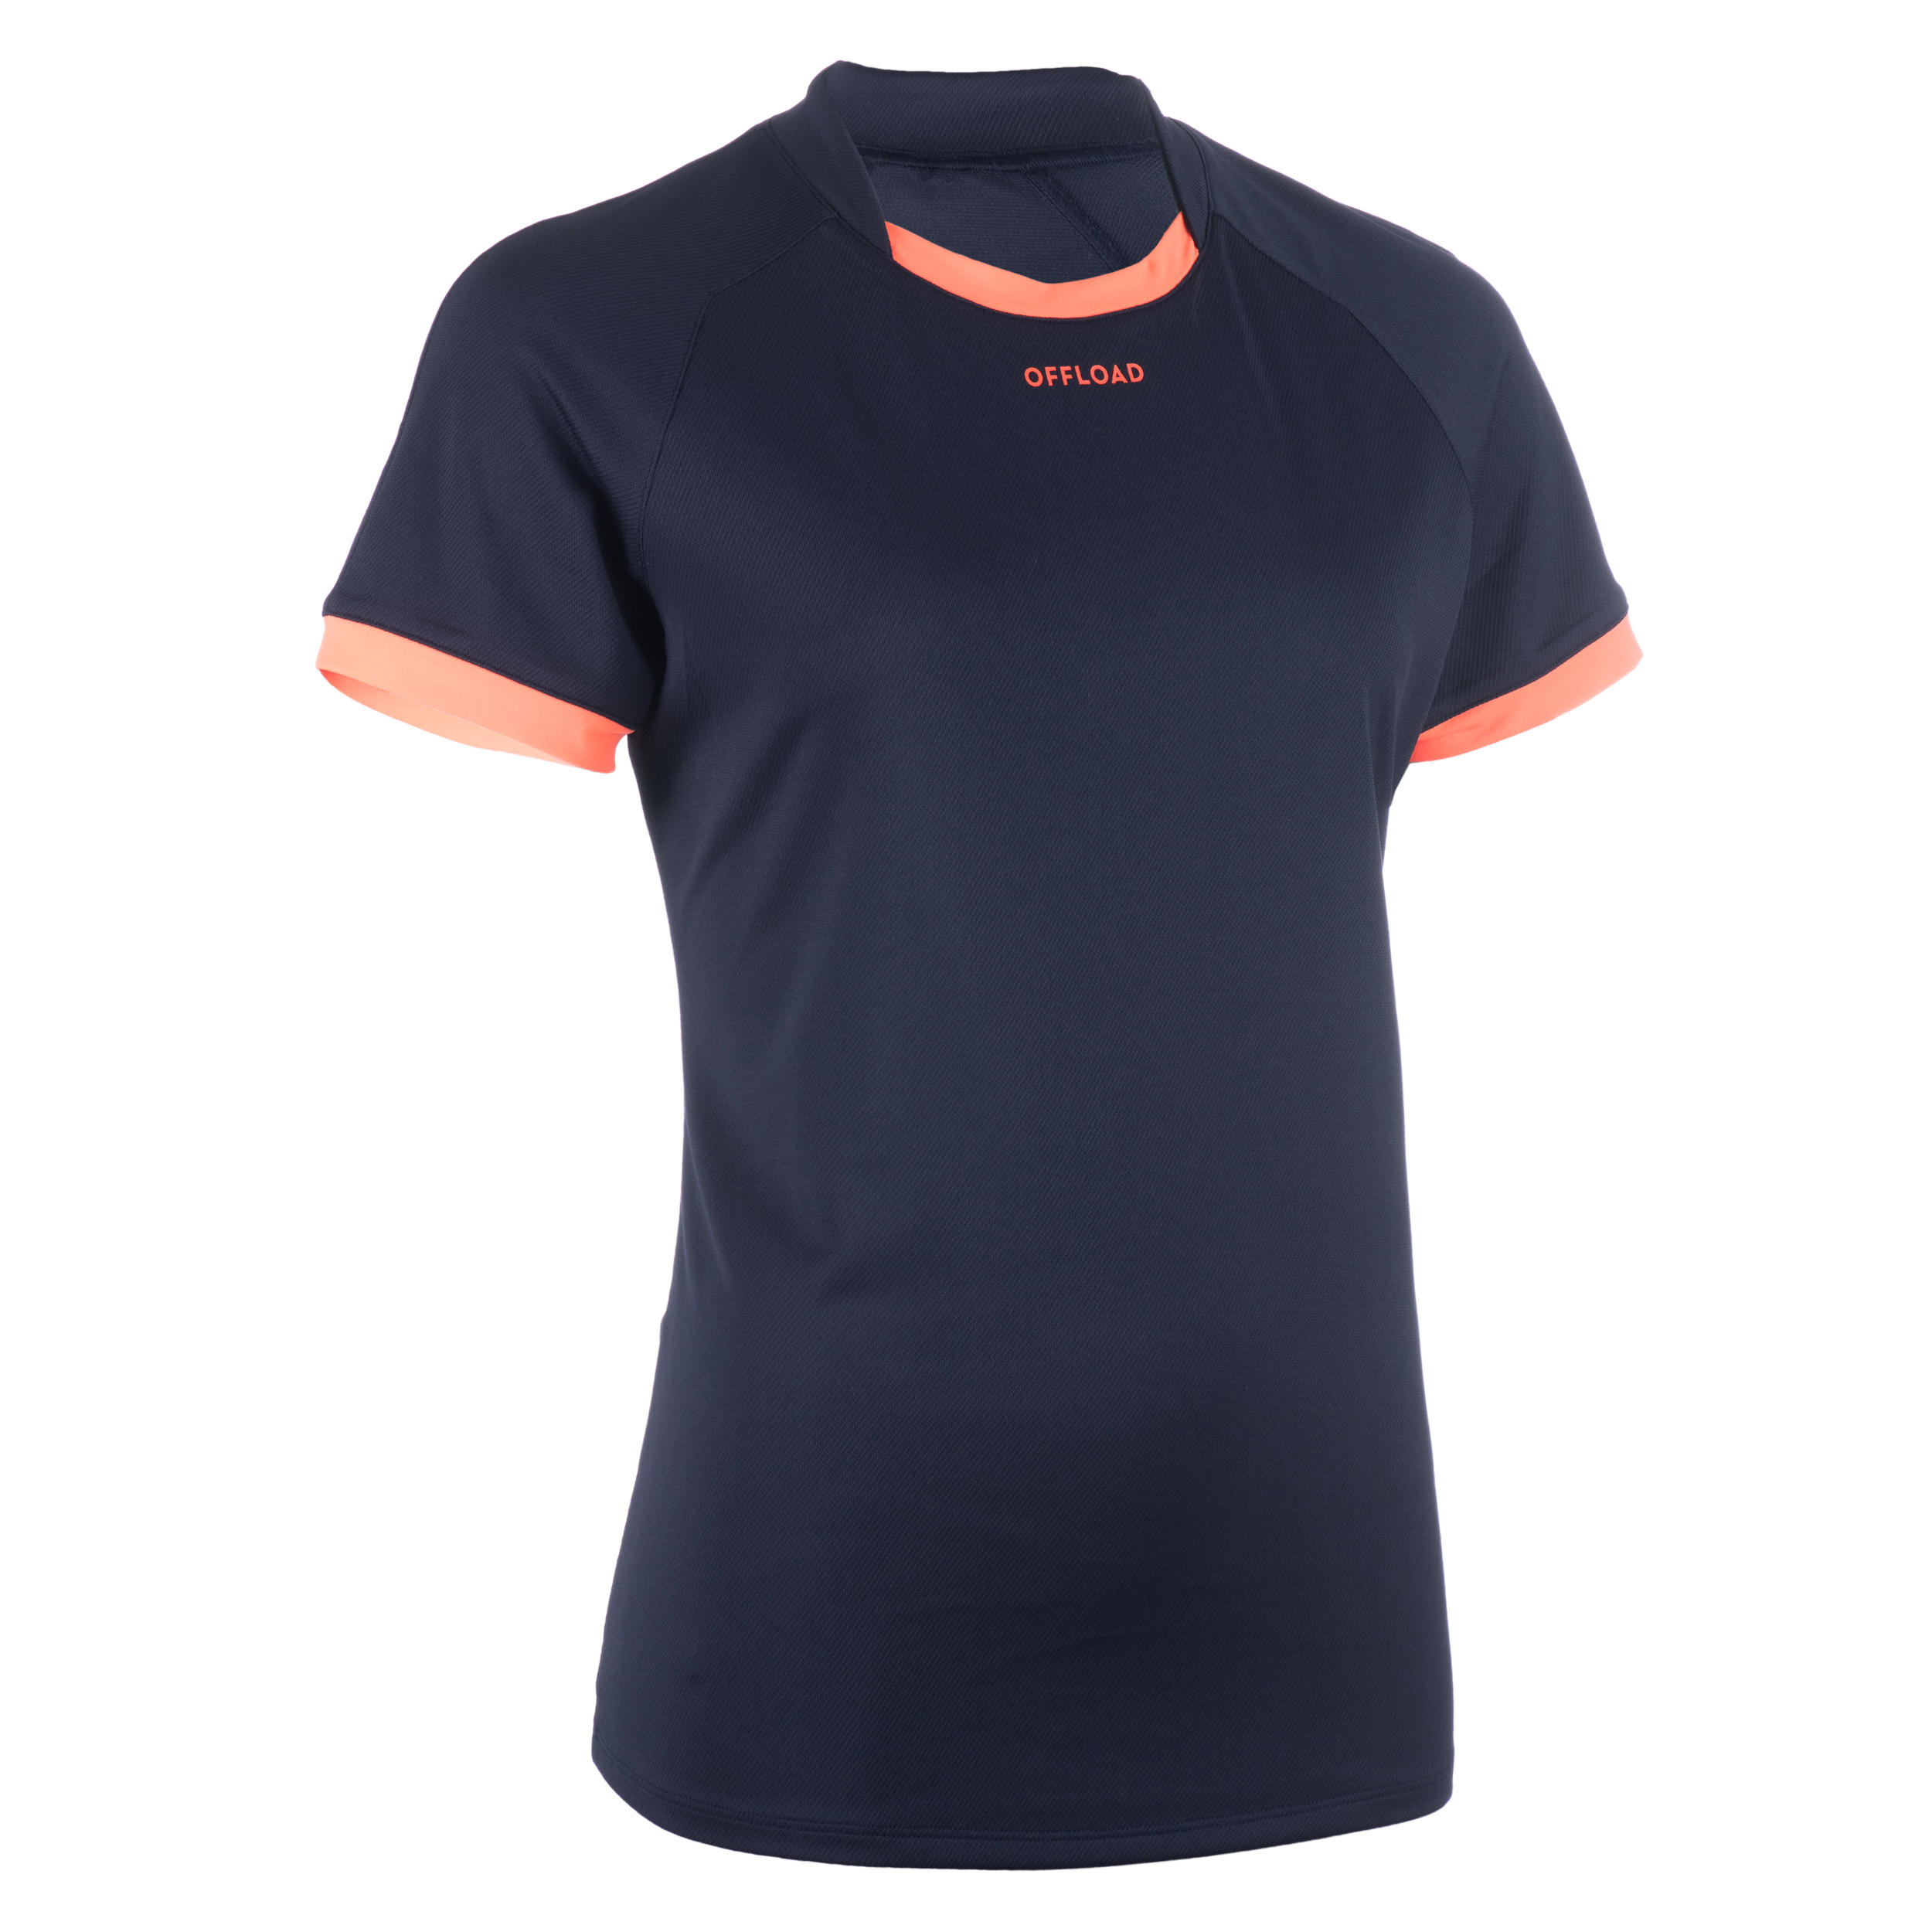 OFFLOAD Women's Short-Sleeved Rugby Jersey R100 - Navy Blue/Coral